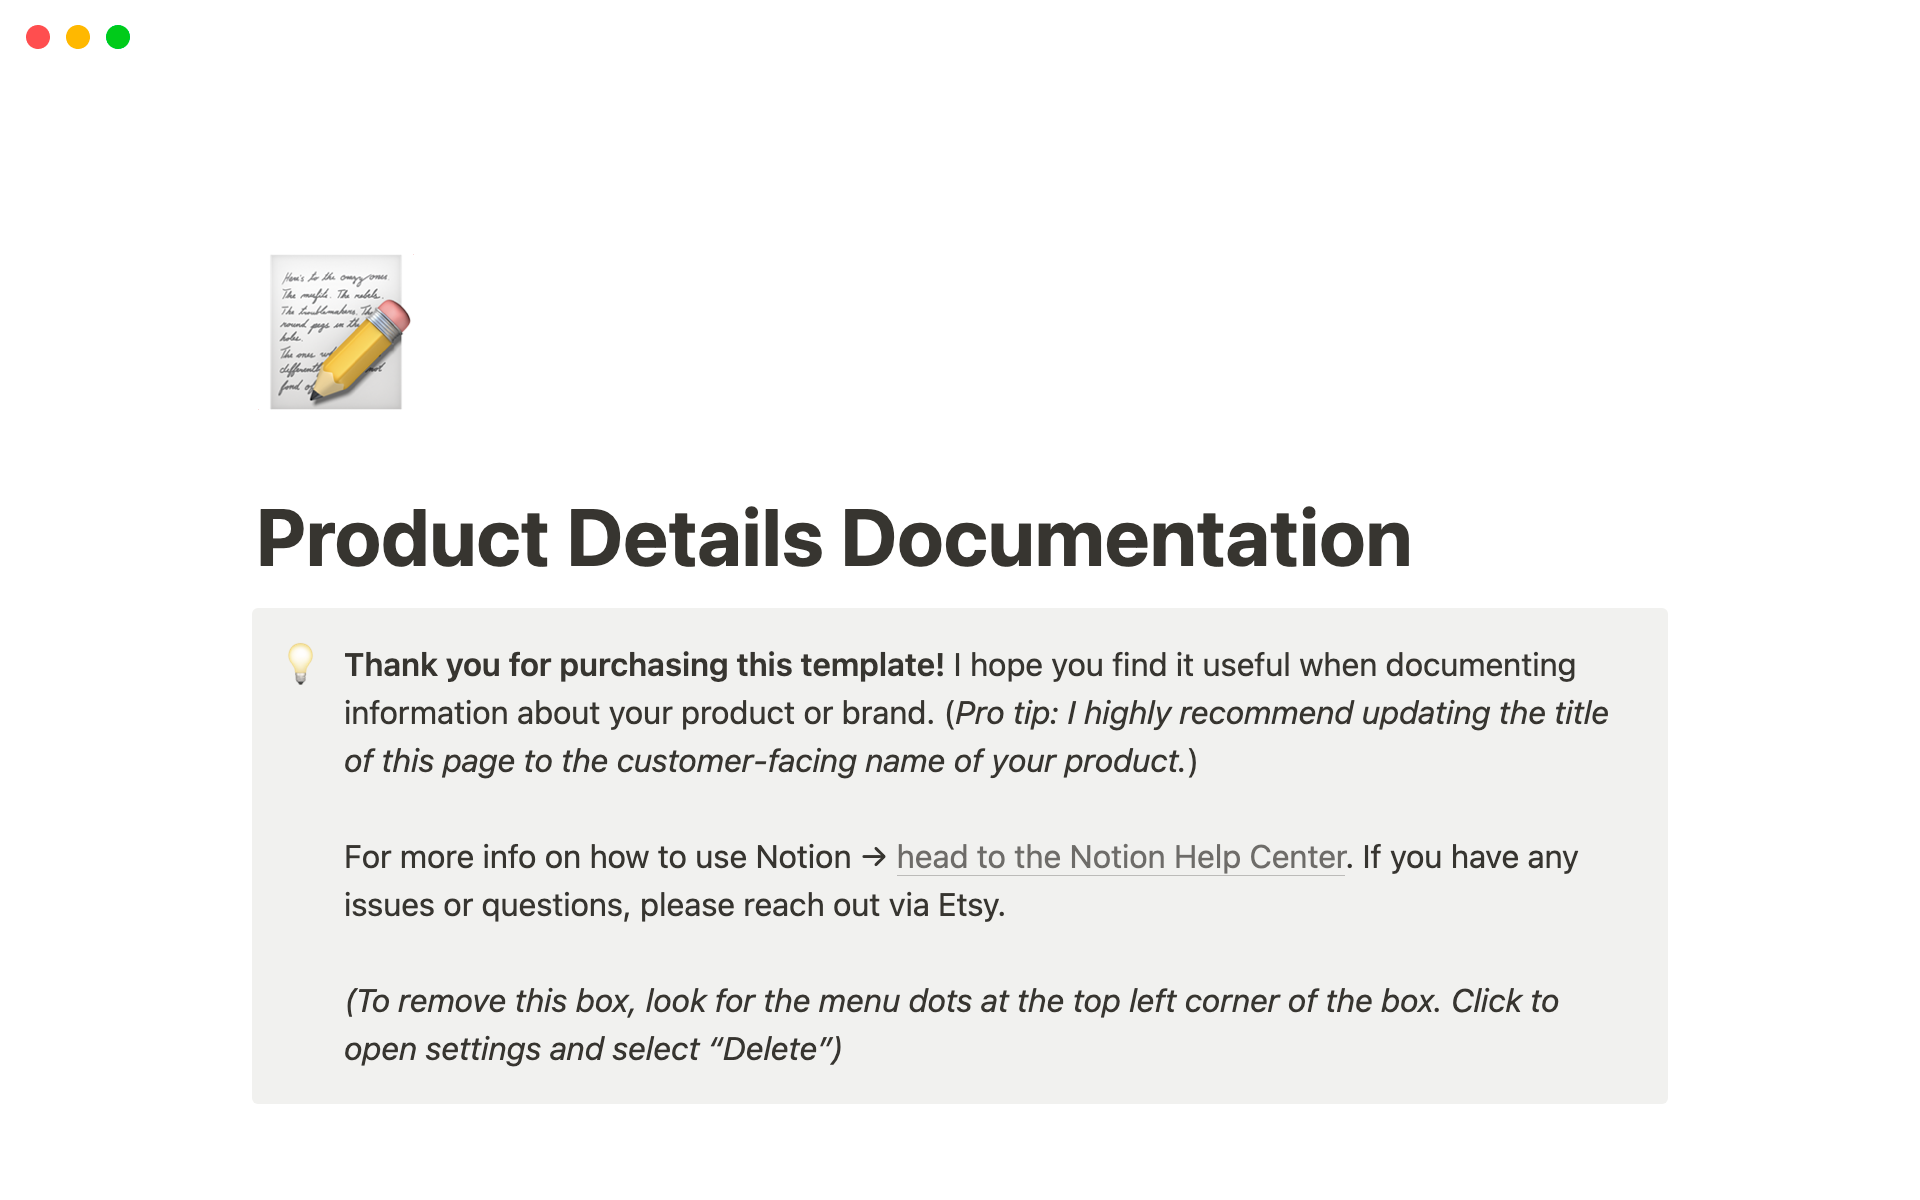 A streamlined way to document your product marketing details in one place.